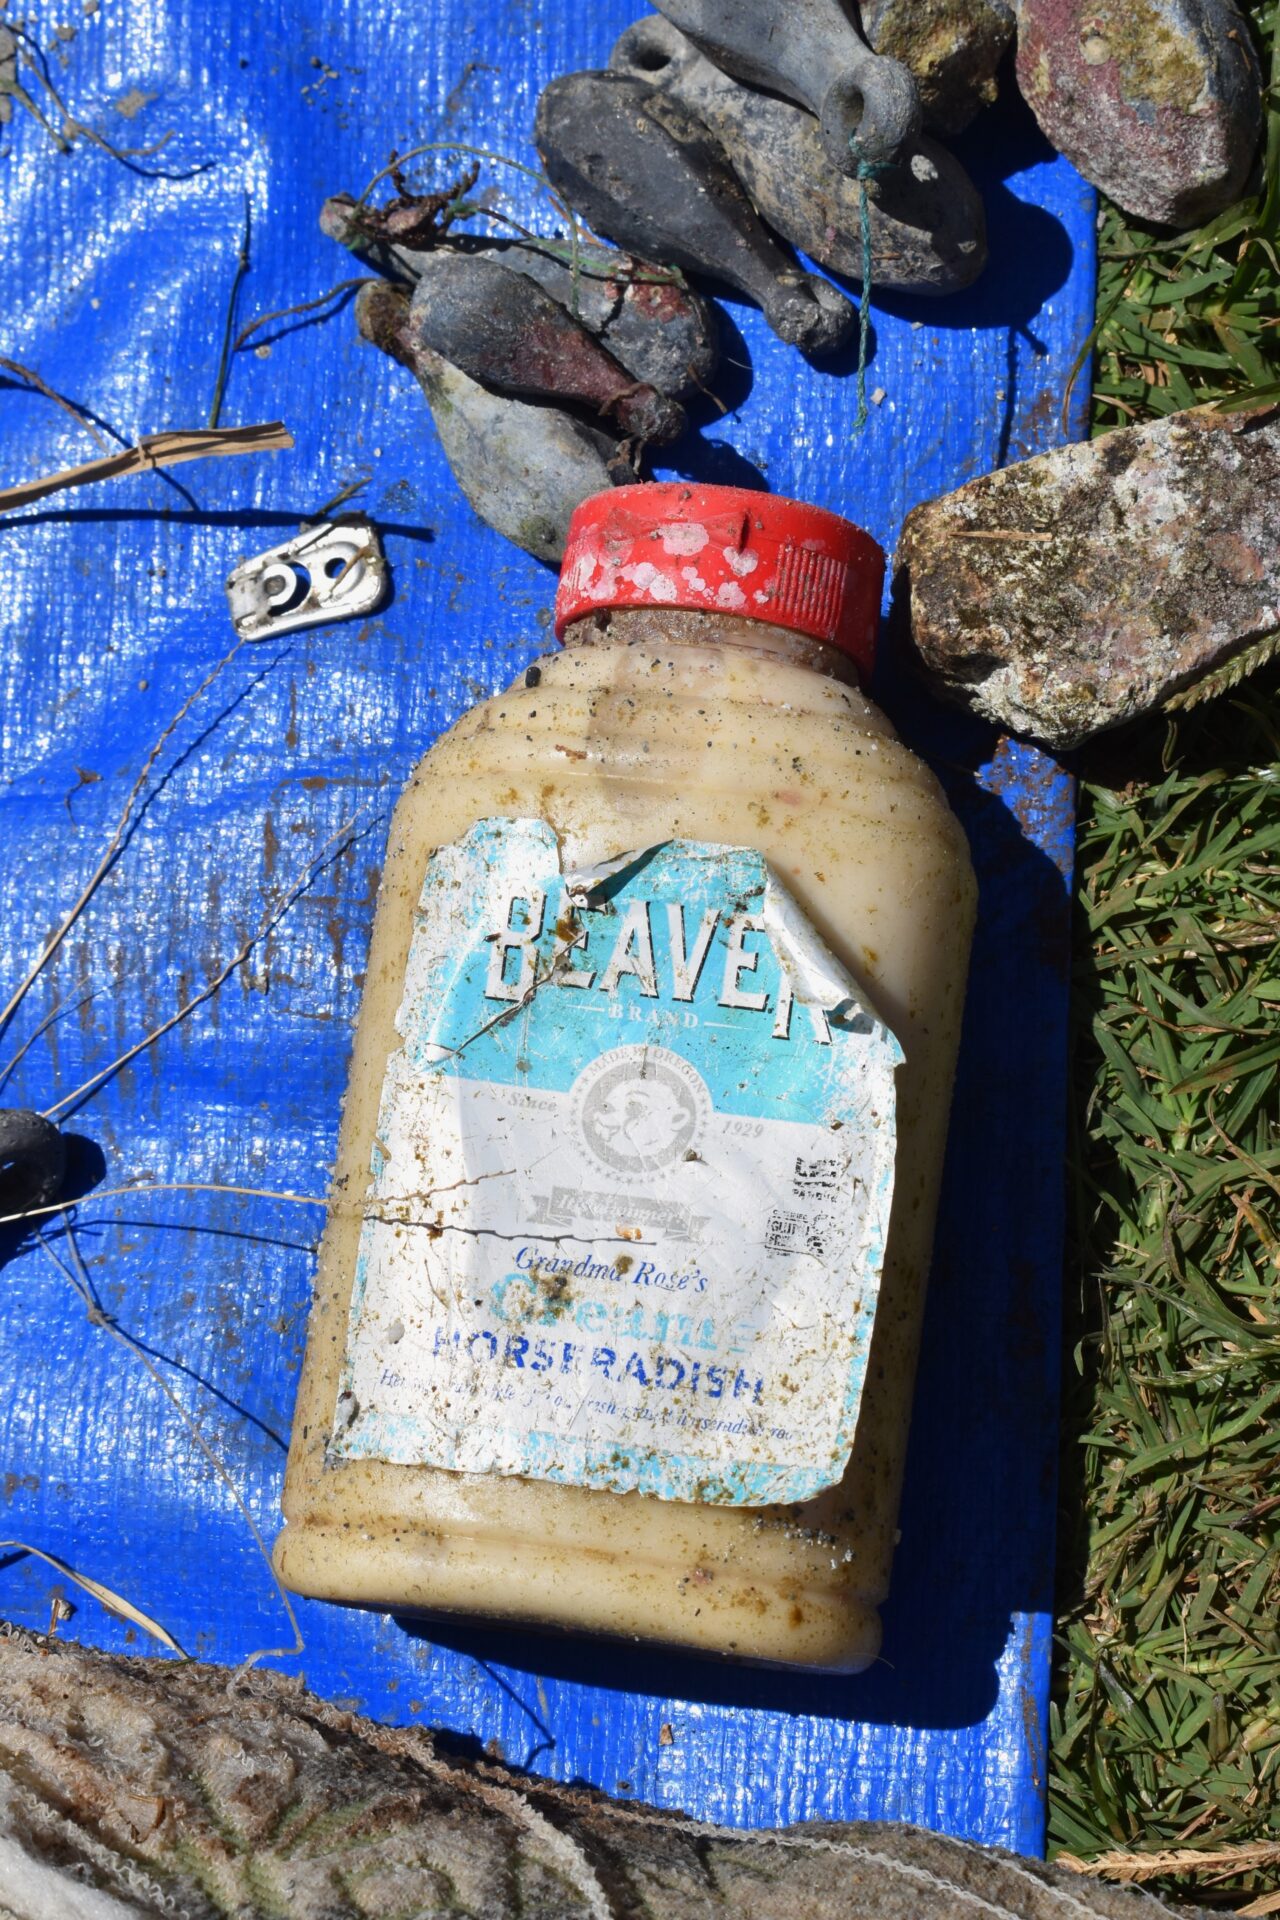 A plastic bottle of horseradish that was removed from the ocean during a Nudi Wear cleanup dive at a popular dive site on Oahu